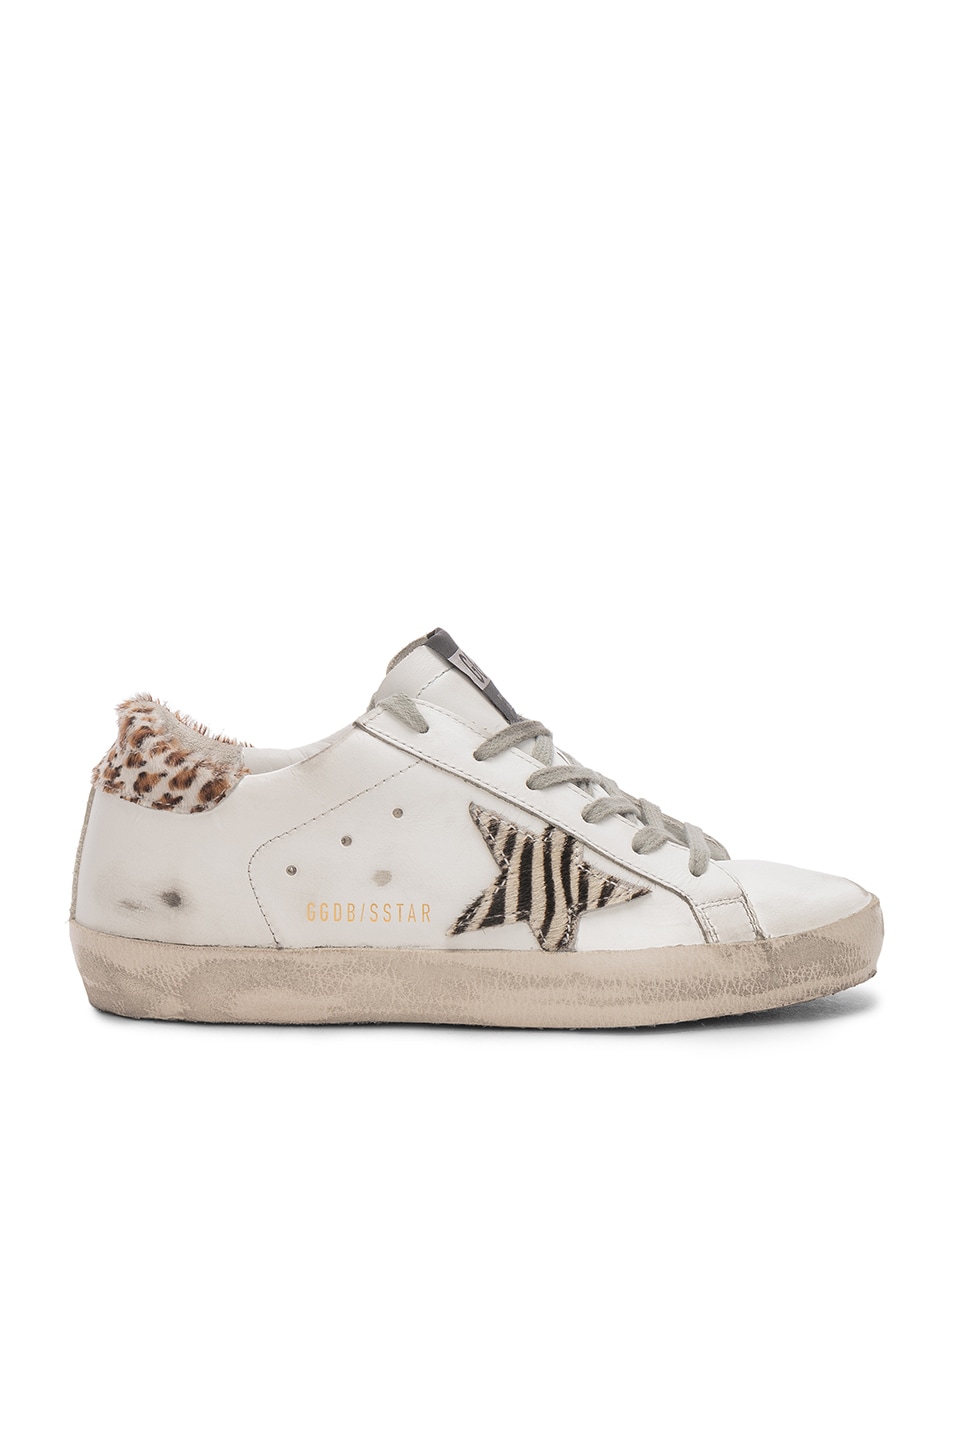 Image 1 of Golden Goose Superstar Sneakers in White Leather Wild